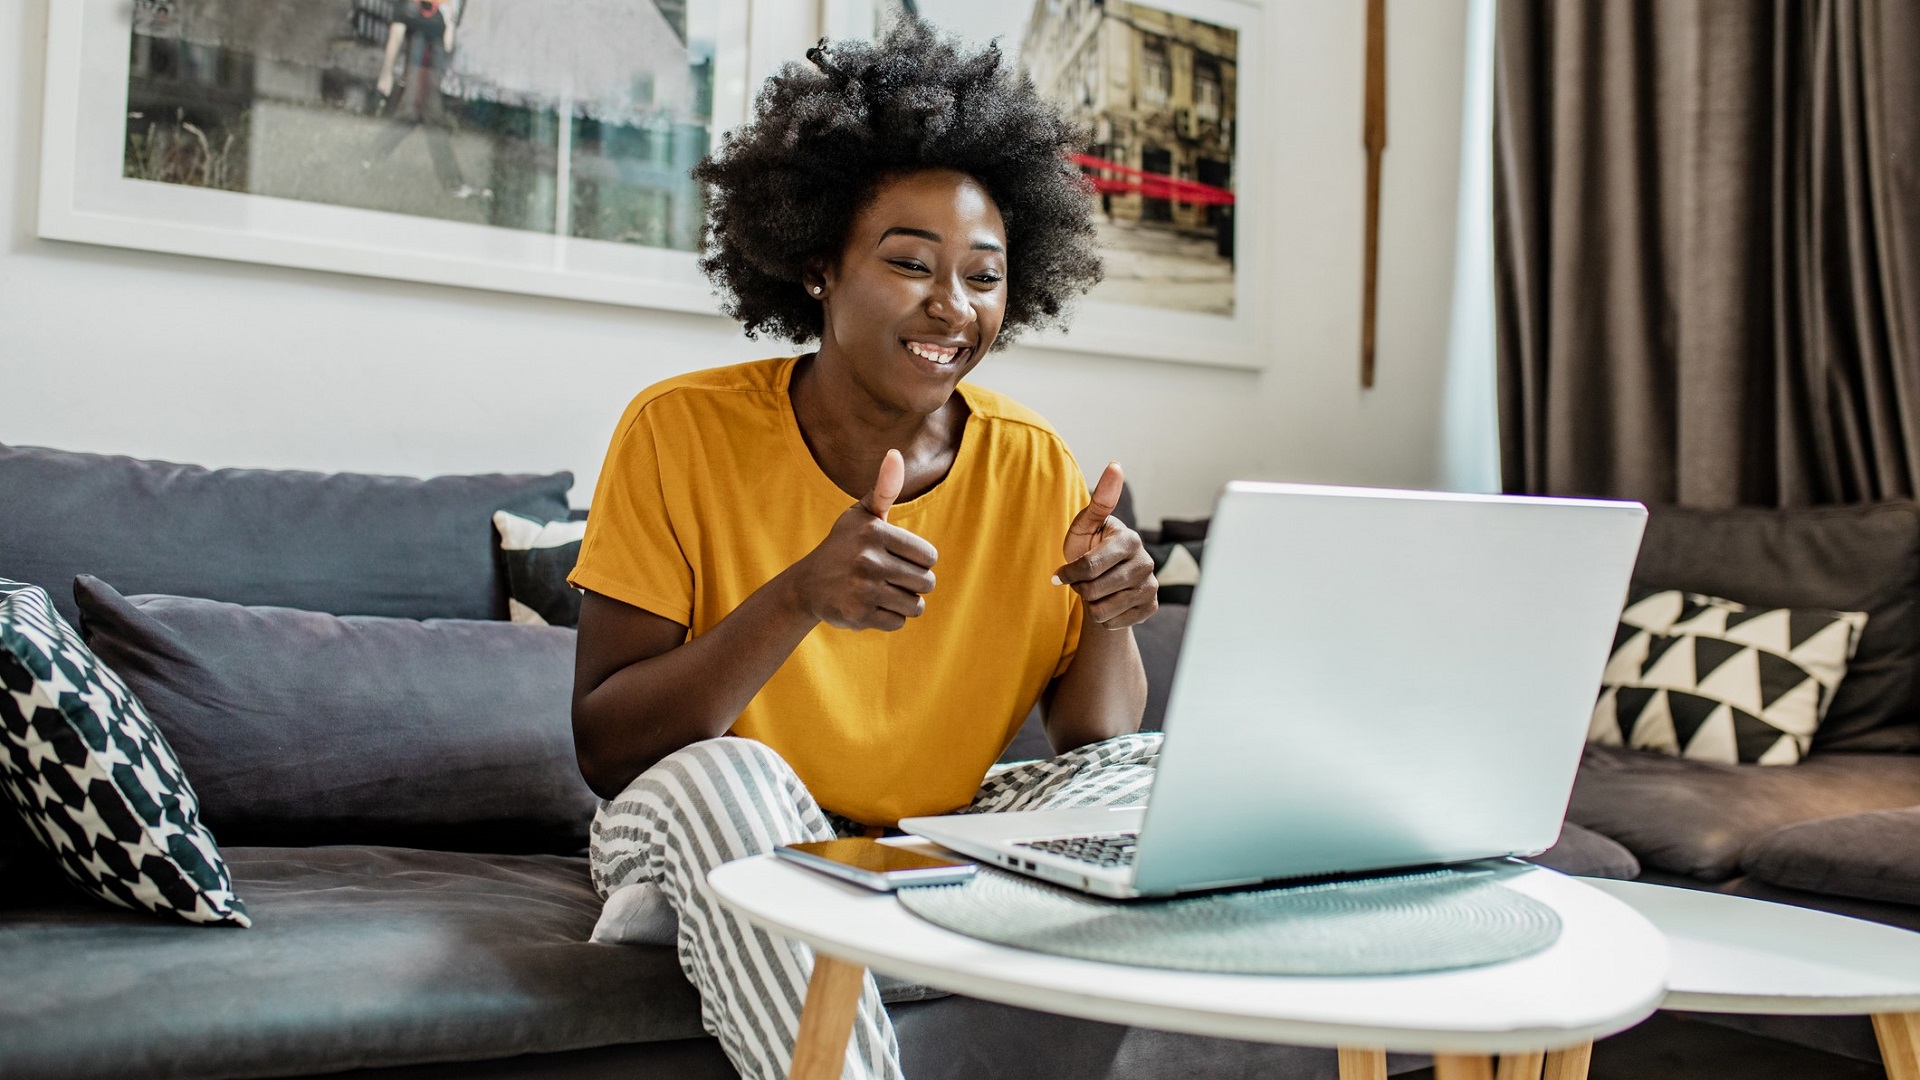 is it time for you to look for remote work? 4 reasons why working from home will save you money